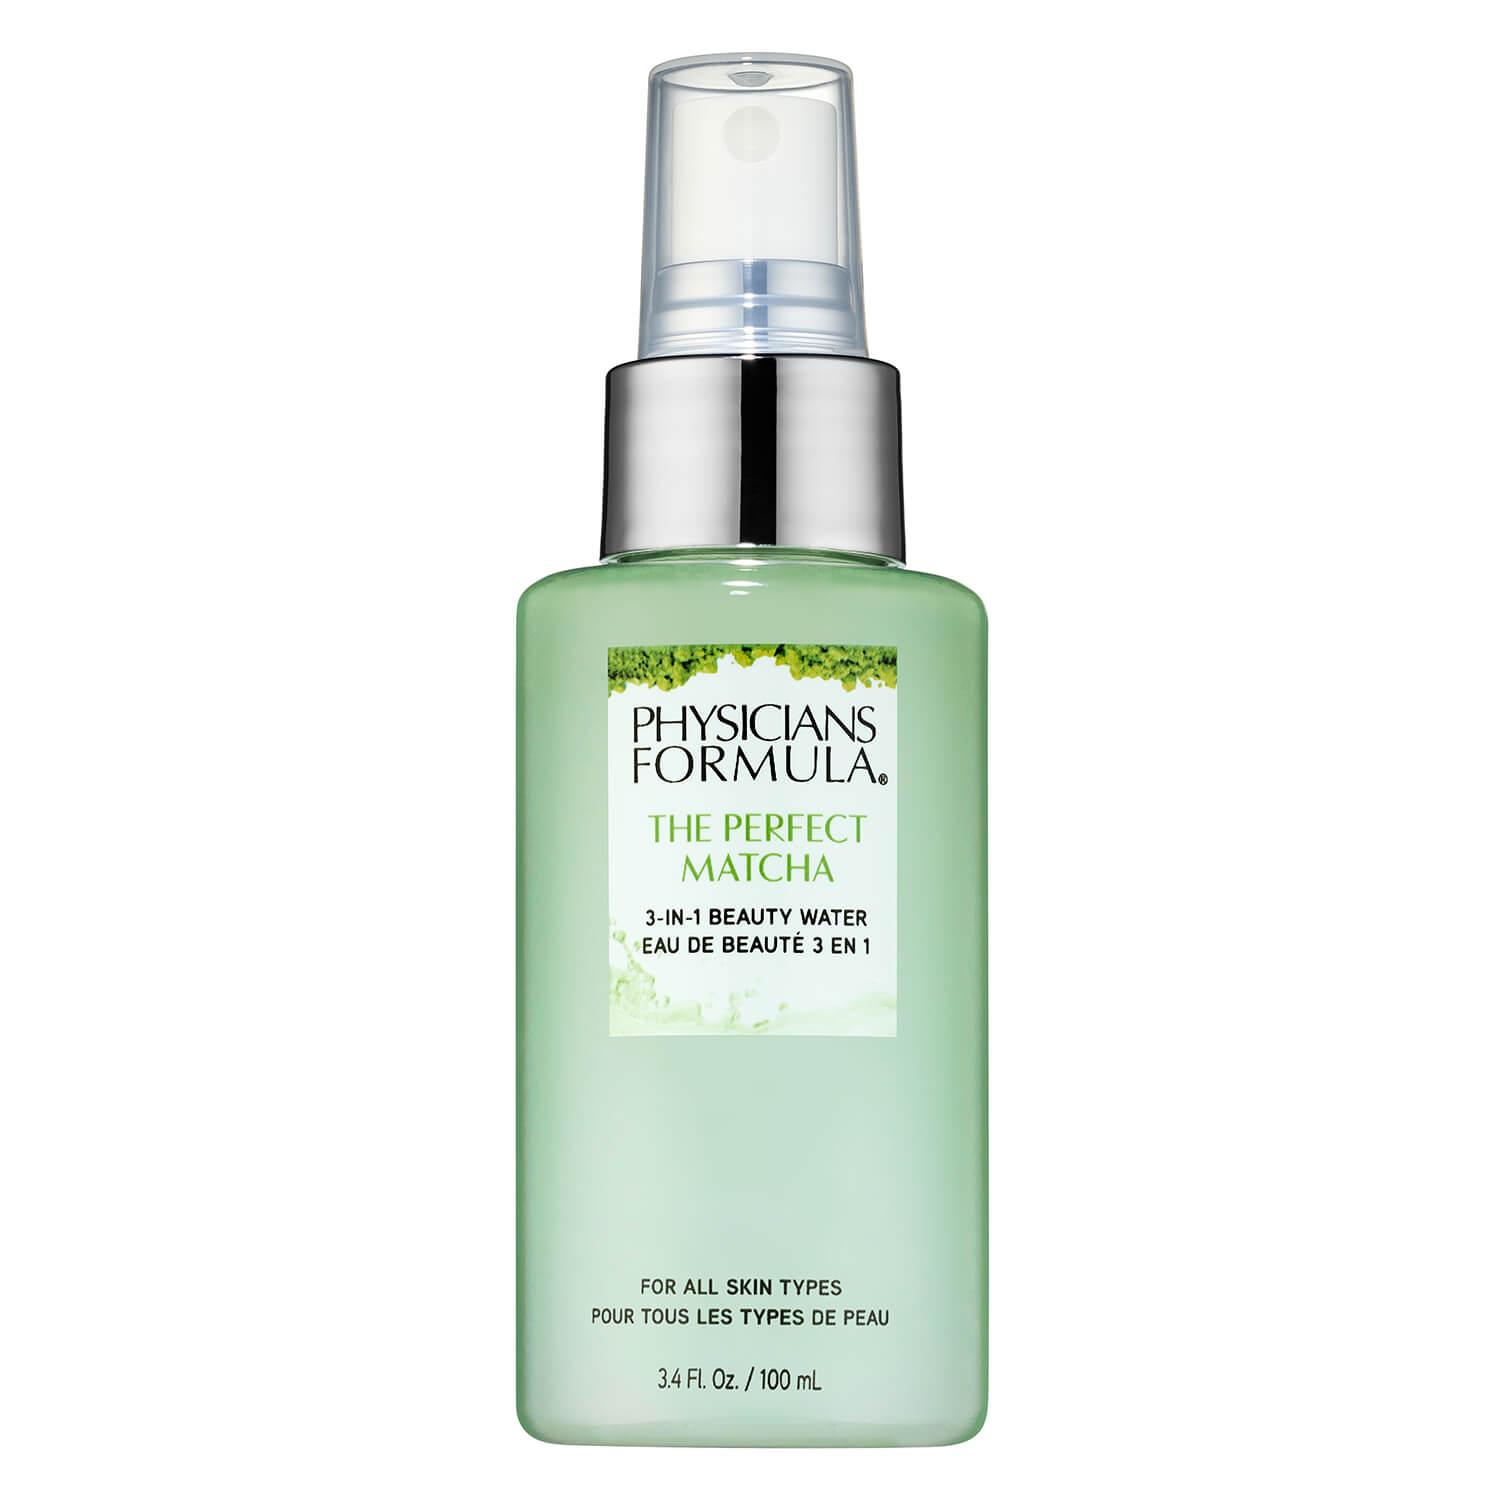 PHYSICIANS FORMULA - The Perfect Matcha 3-in-1 Beauty Water